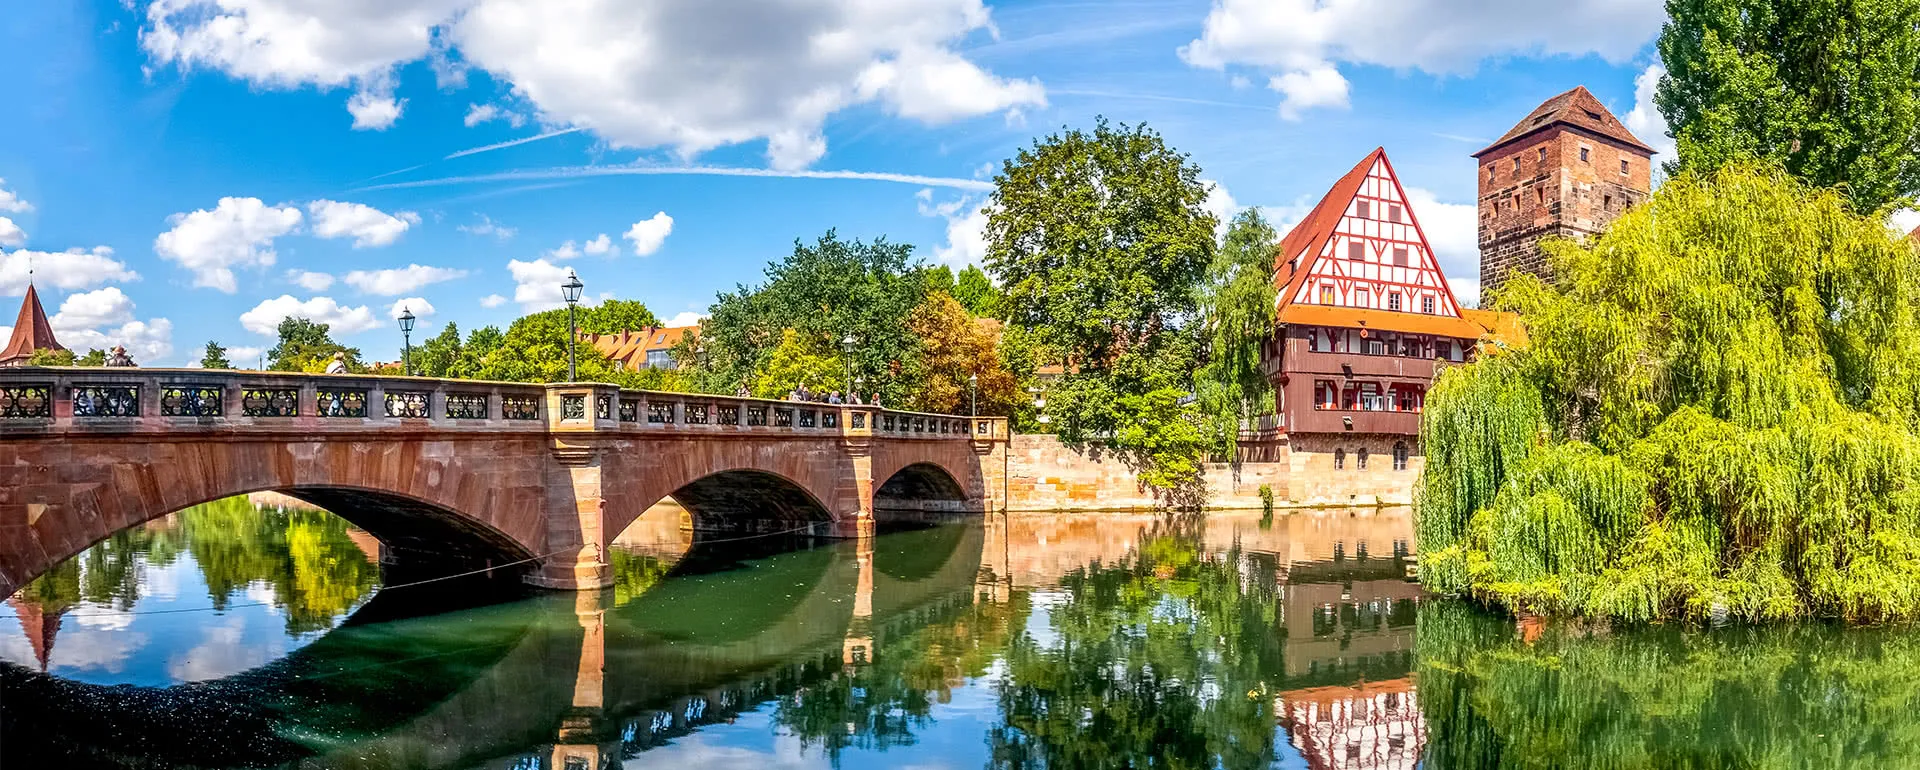 Nuremberg - the destination with youth hostels